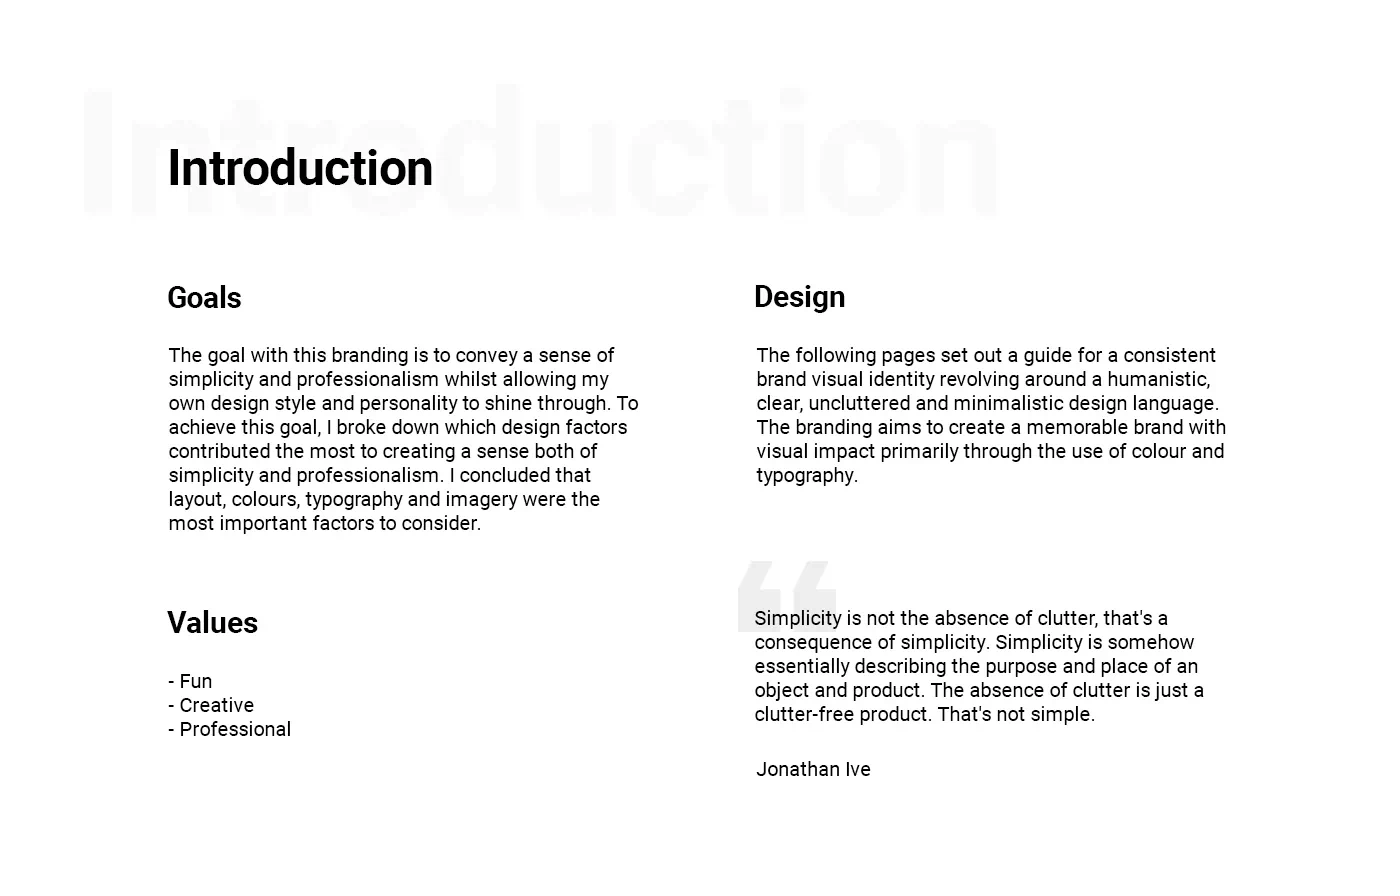 The introduction page sets out the goals, values and design style of the brand